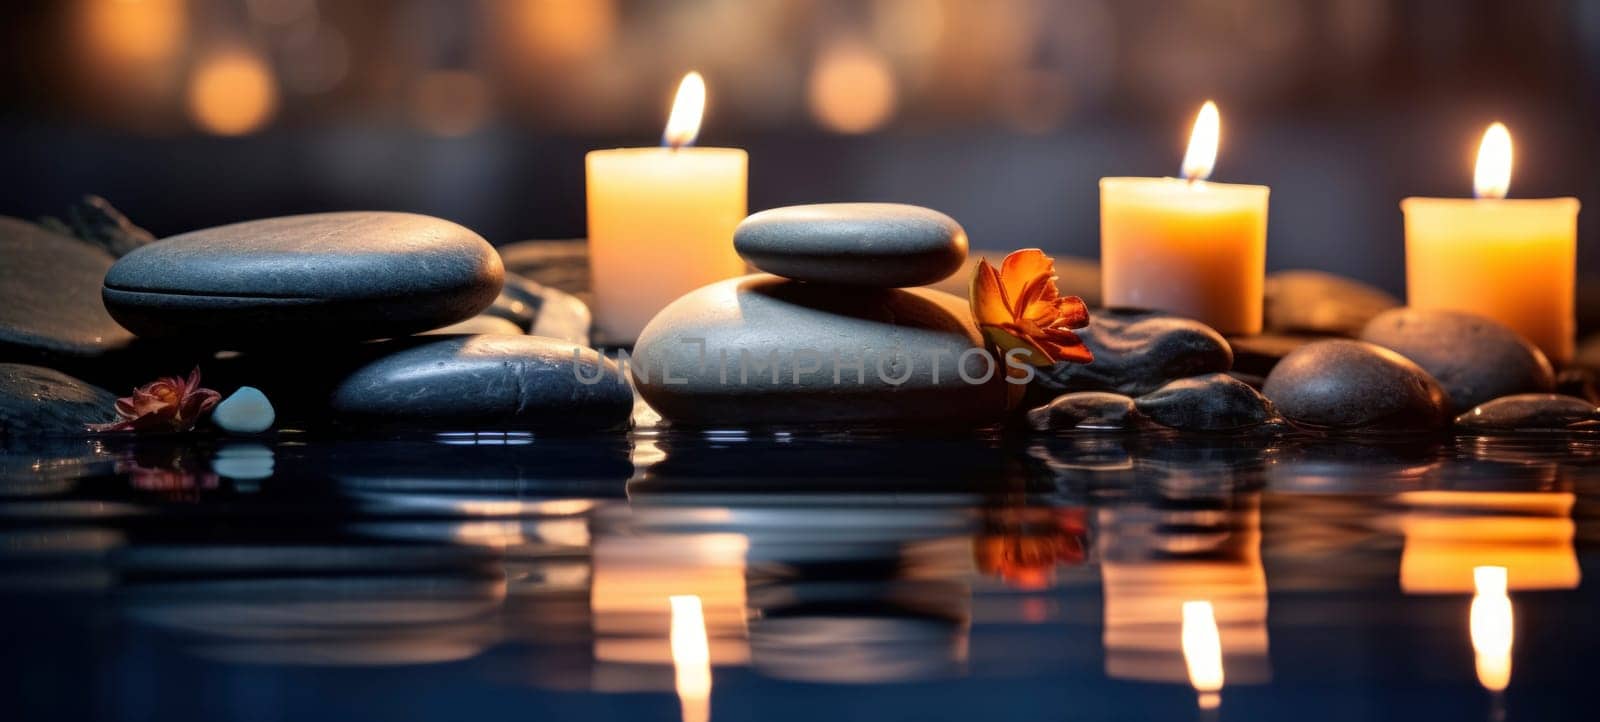 Smooth river stones balanced in still water with lit candles and bamboo backdrop, offering a scene of Zen and relaxation.